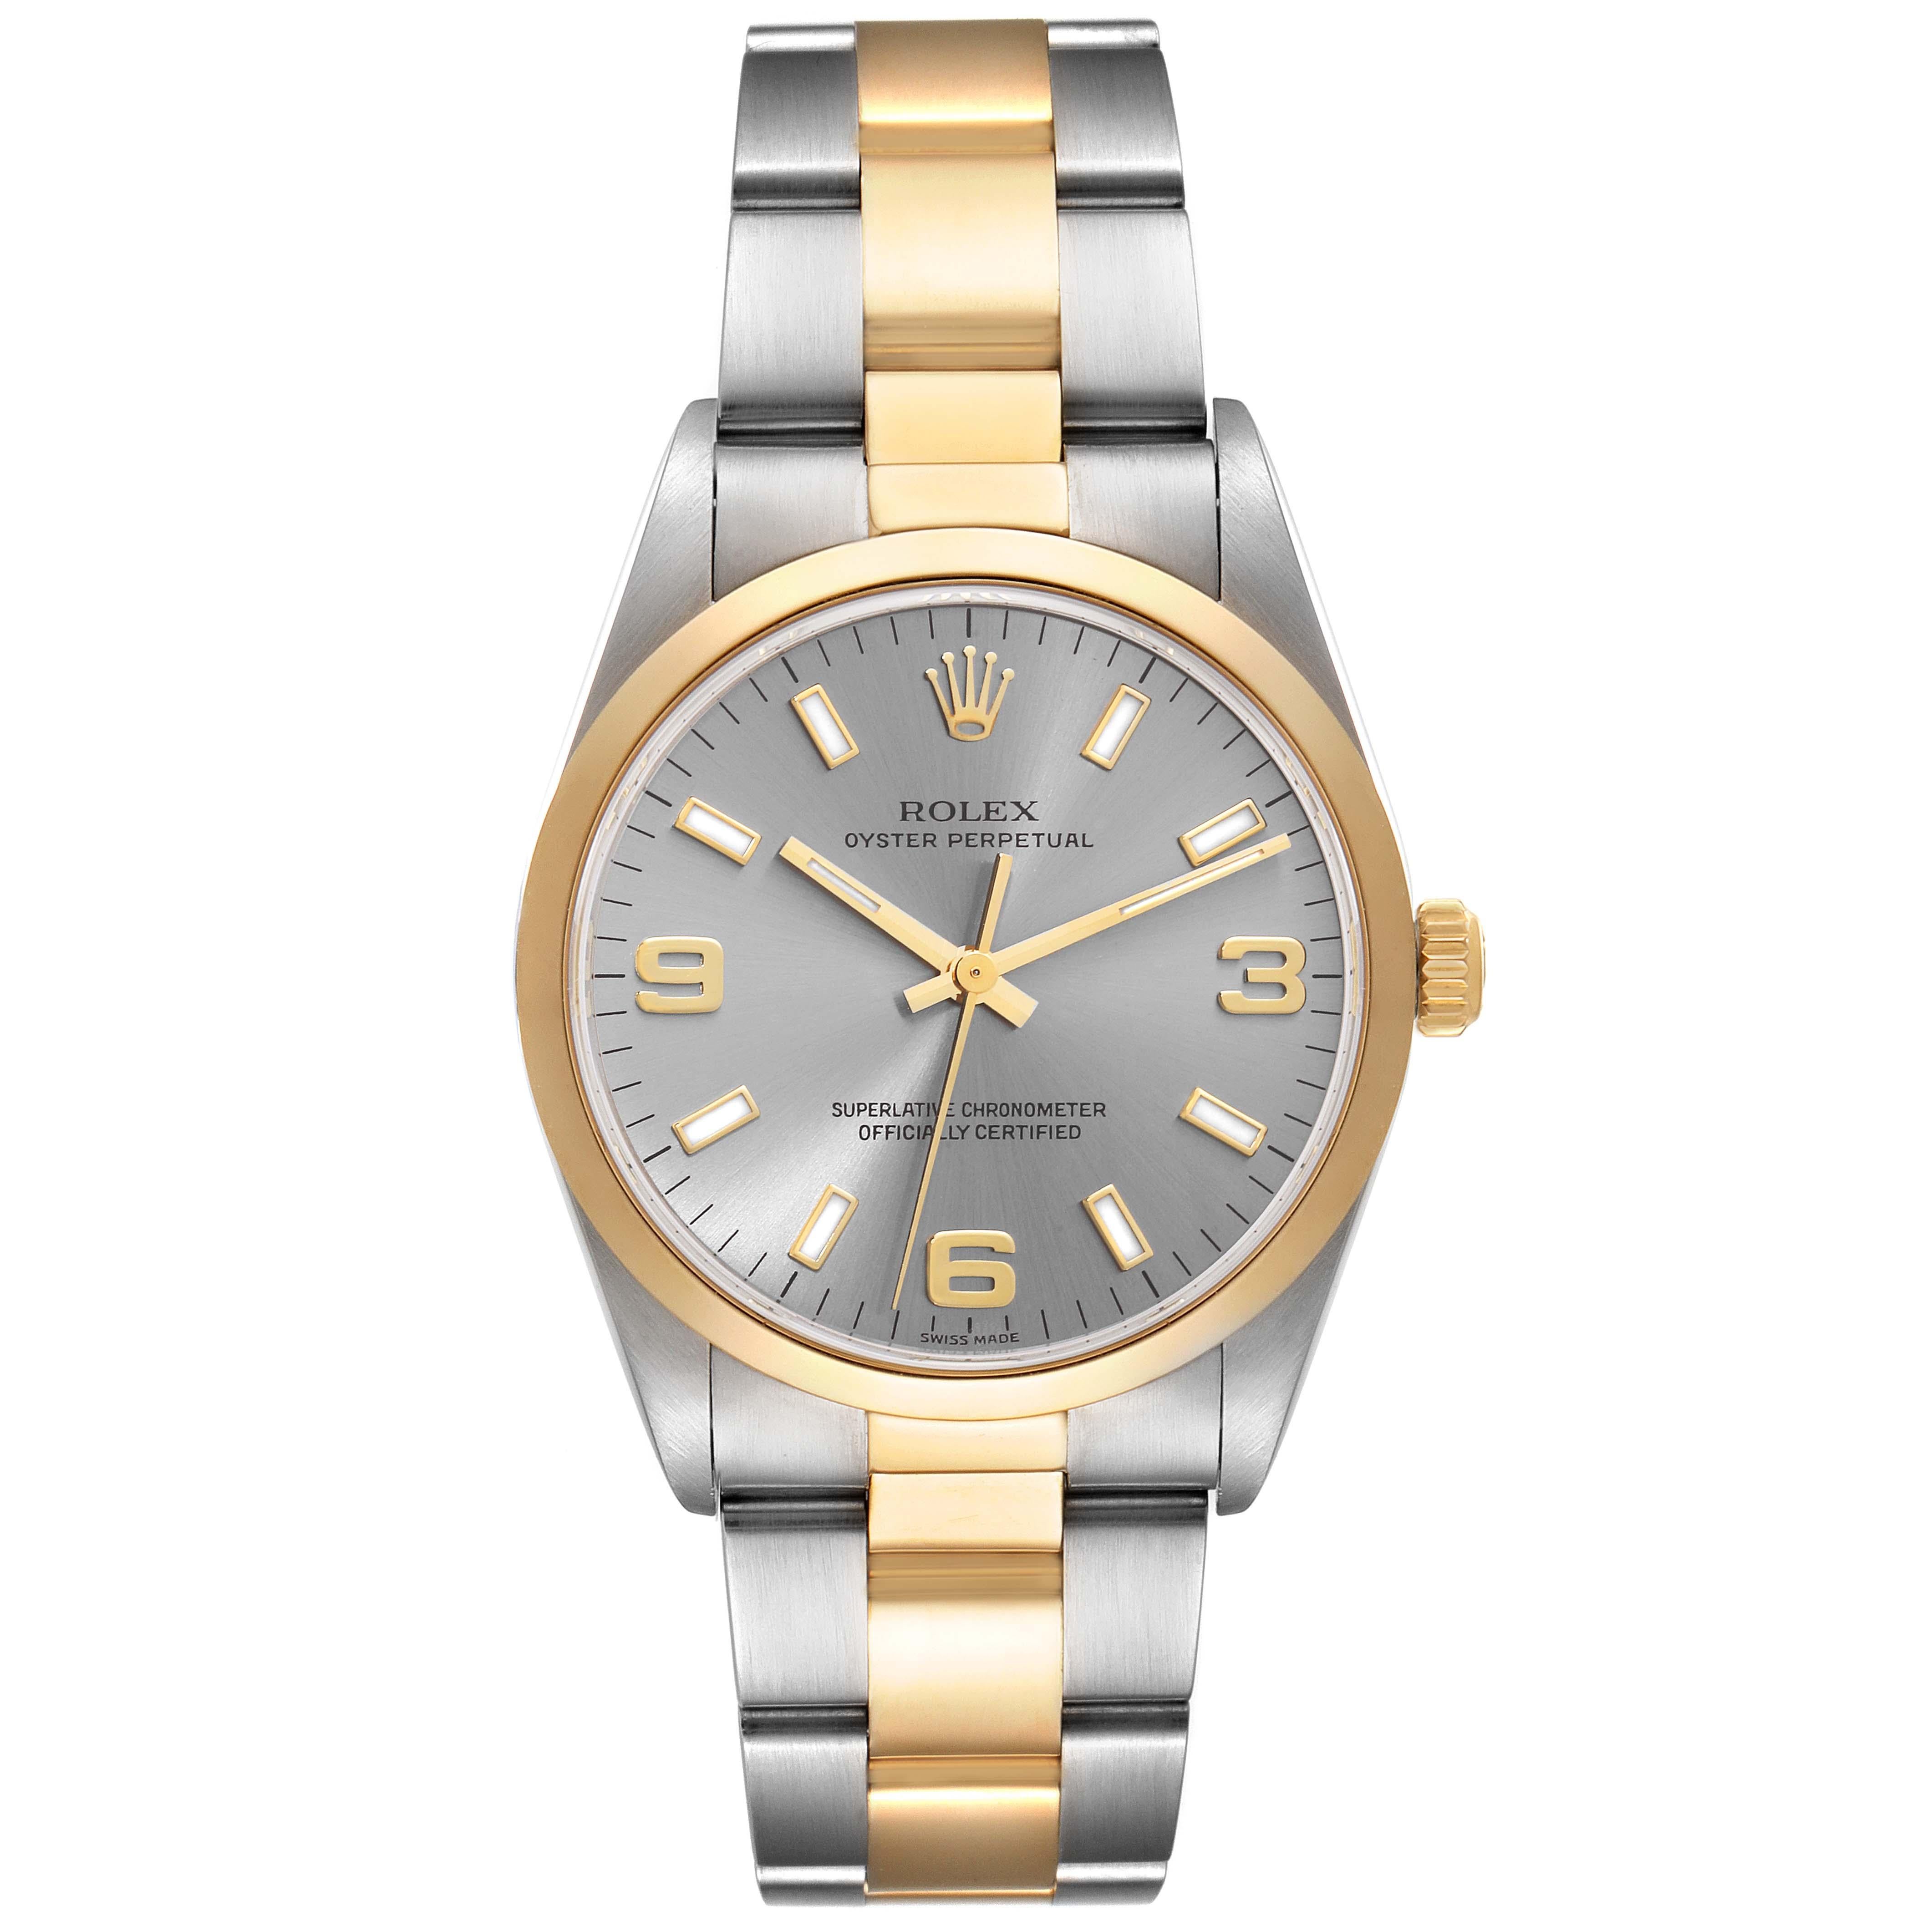 Rolex Oyster Perpetual Steel Yellow Gold Slate Dial Mens Watch 14203 Box Papers. Officially certified chronometer automatic self-winding movement. Stainless steel and 18K yellow gold oyster case 34.0 mm in diameter. Rolex logo on the crown. 18K